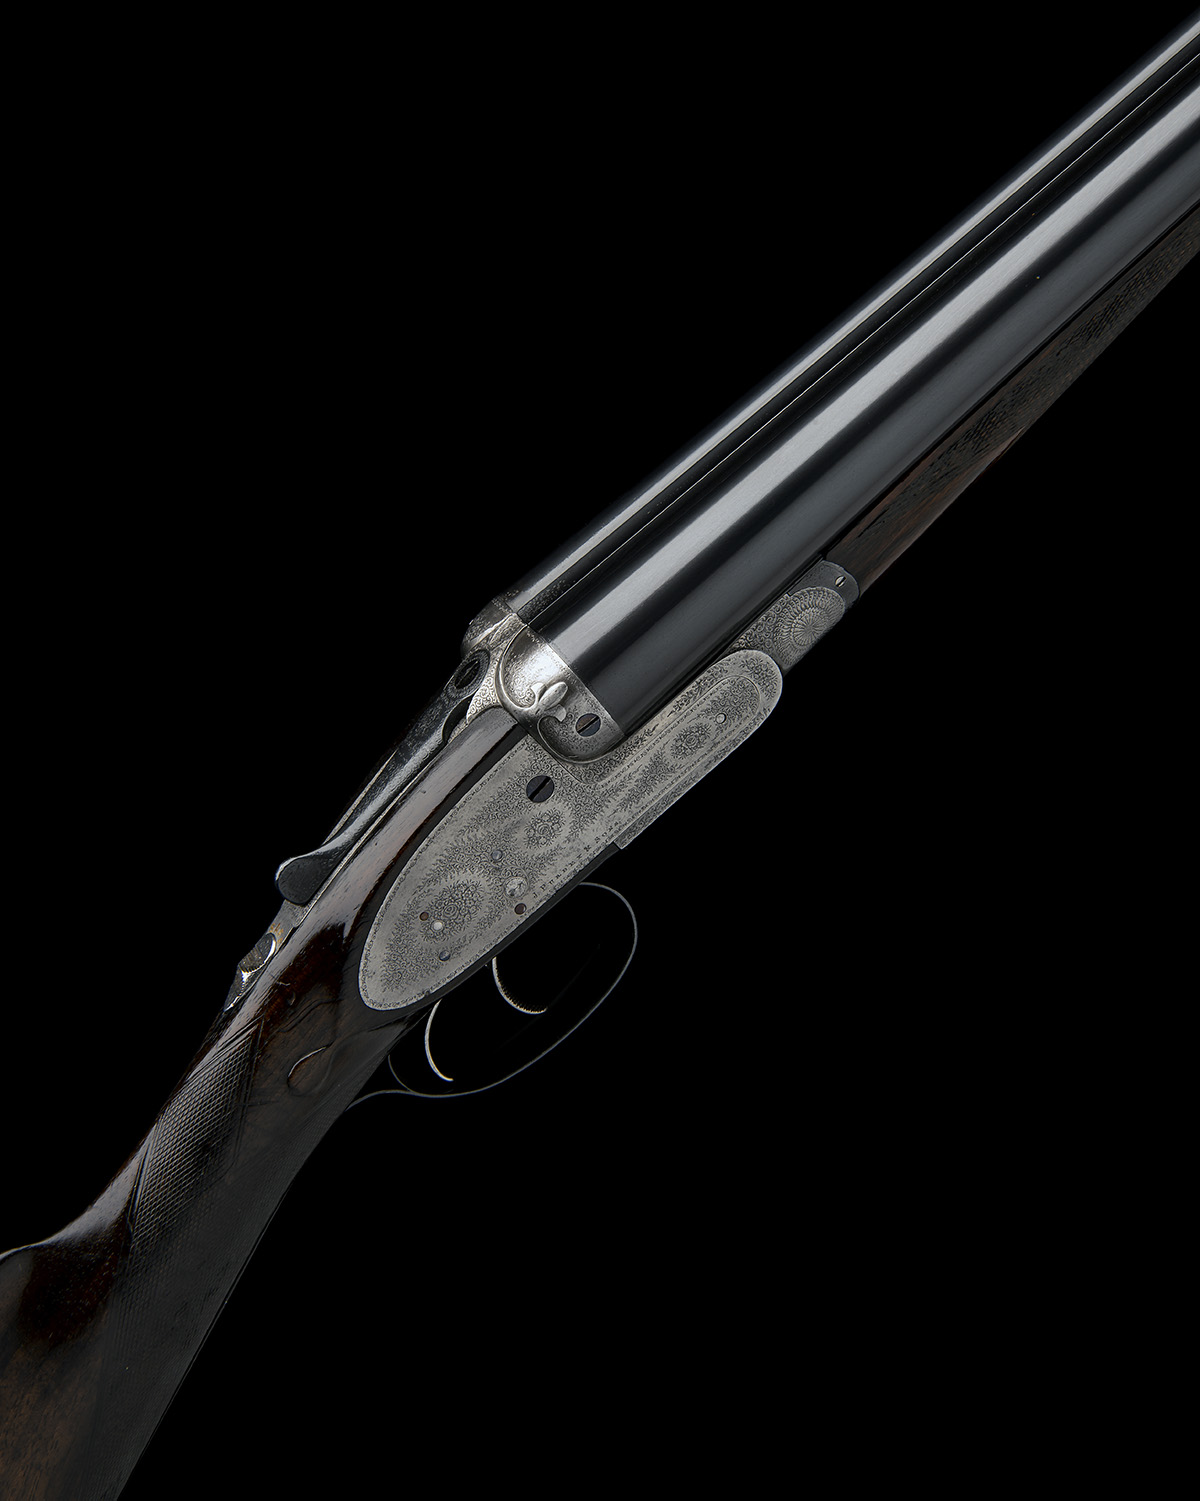 J. PURDEY & SONS A 12-BORE SELF-OPENING SIDELOCK EJECTOR, serial no. 11264, 29 1/2in. replacement